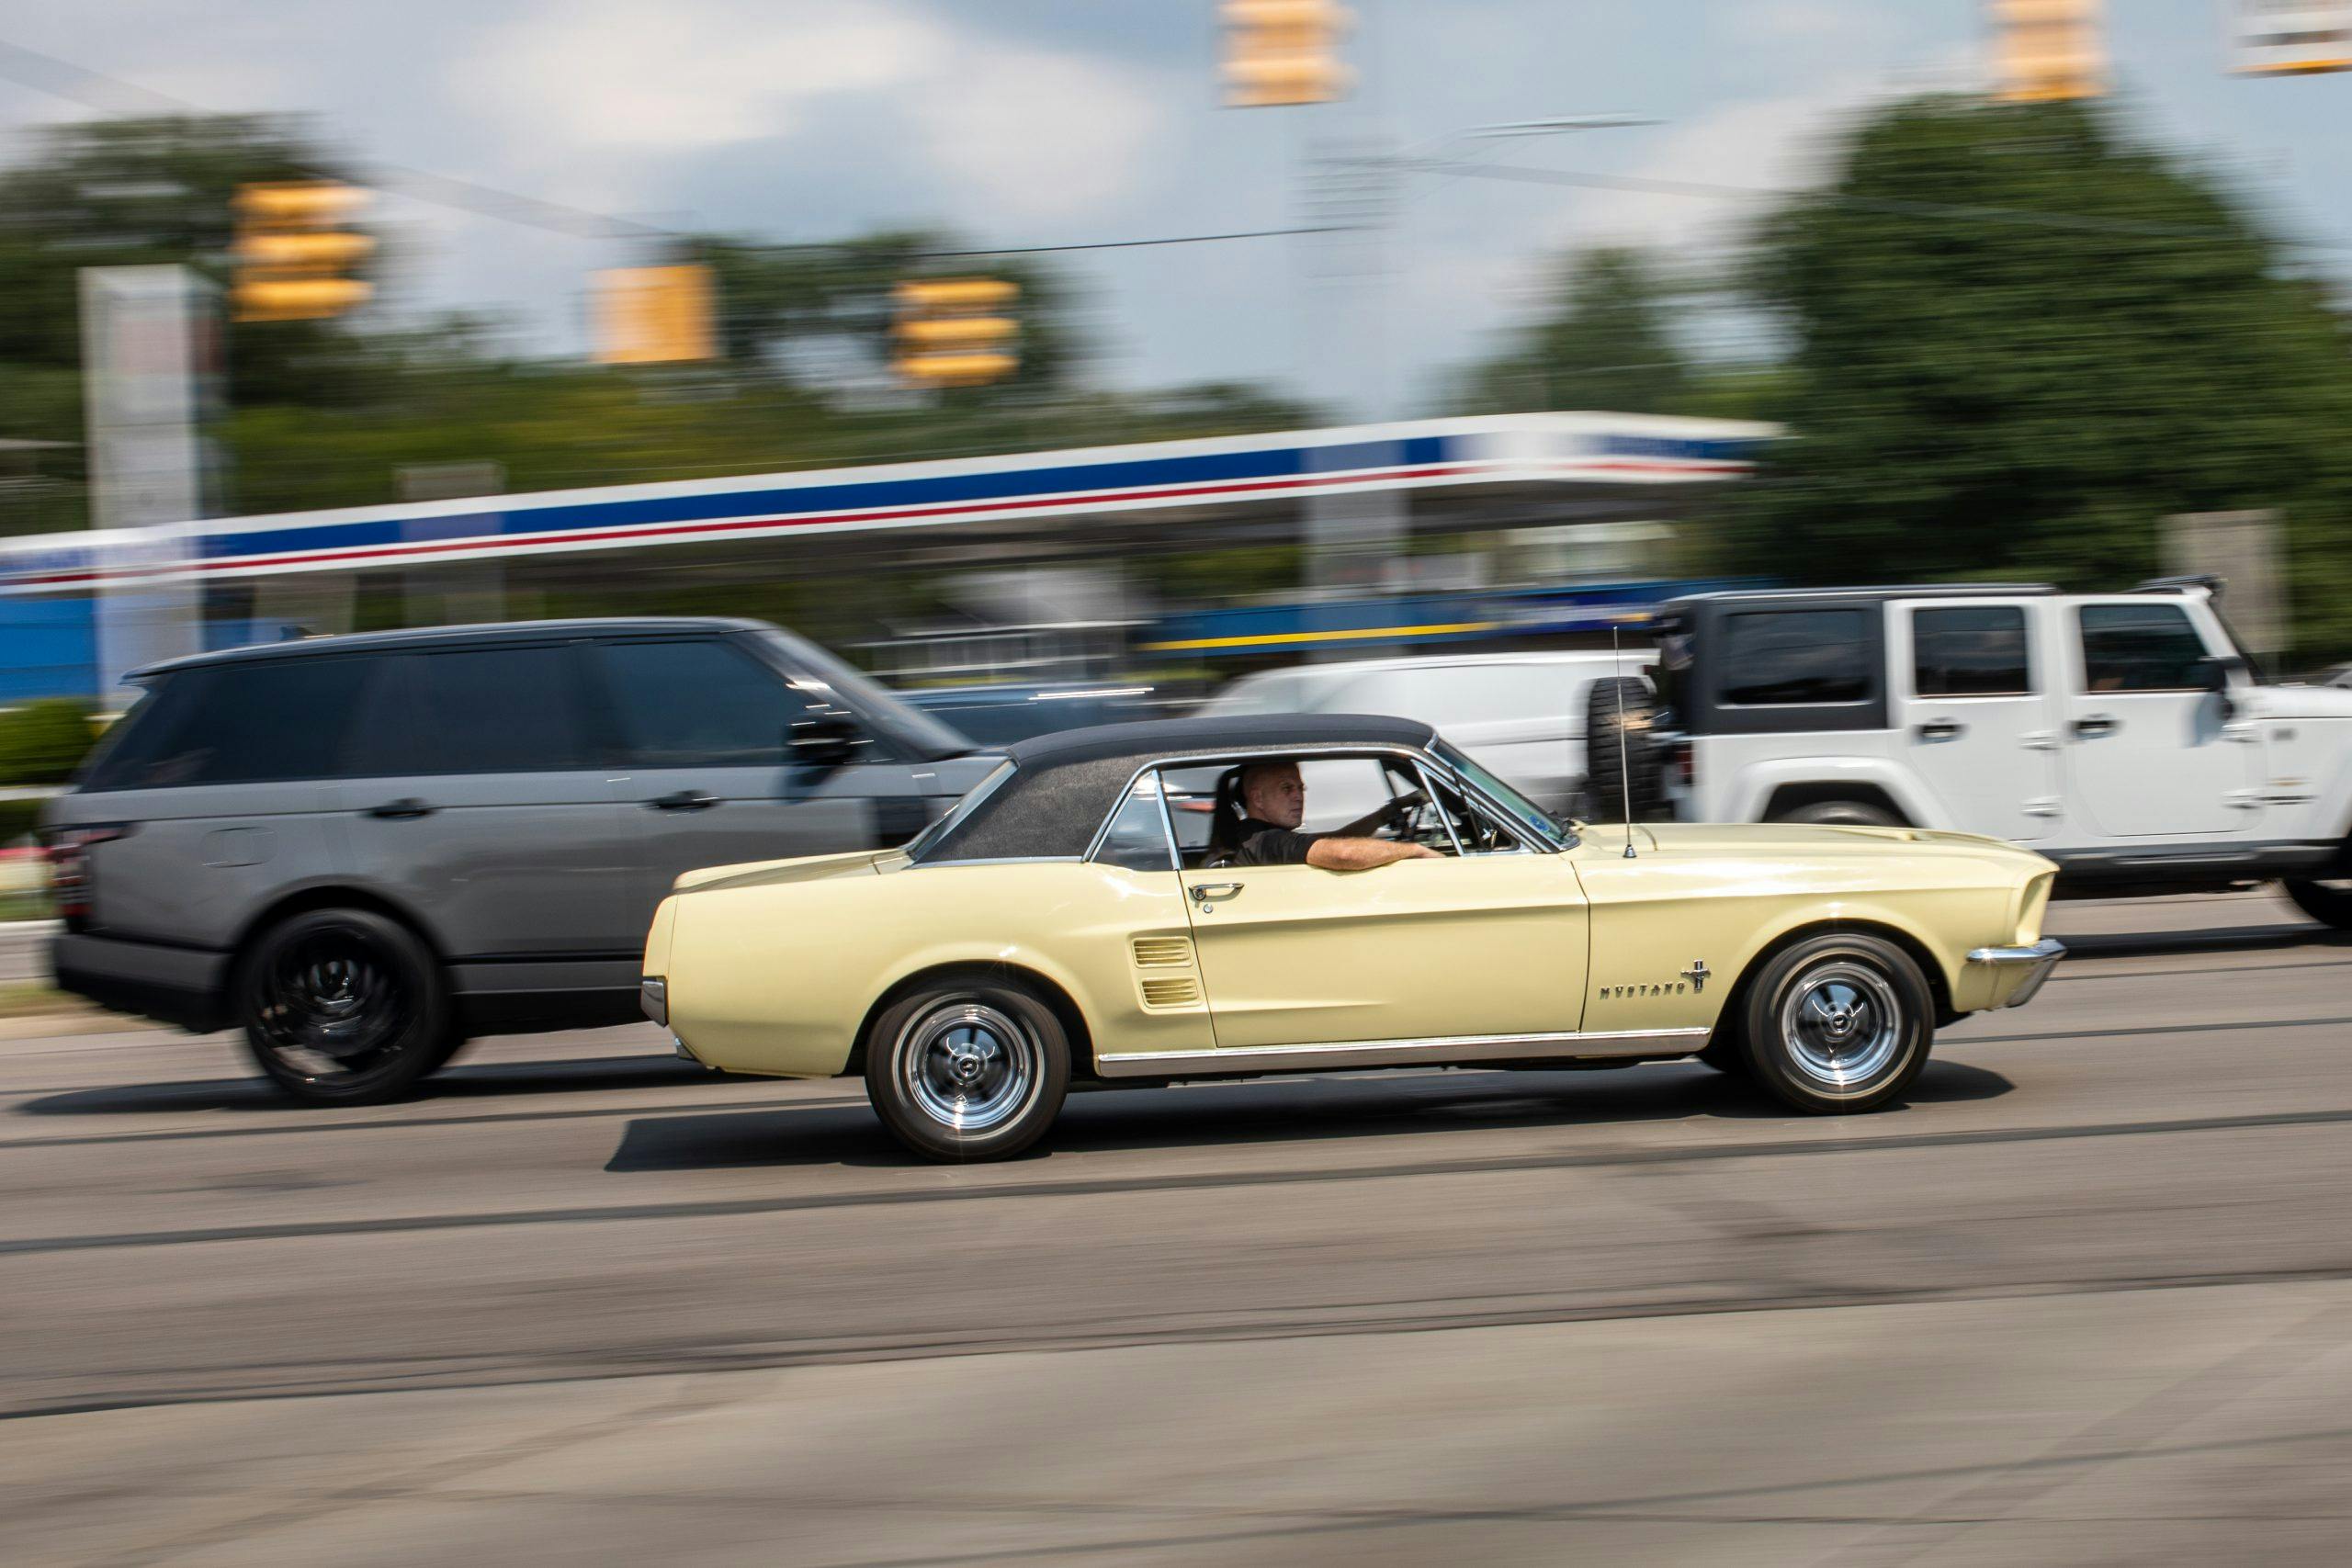 2021 Dream Cruise woodward ave classic mustang